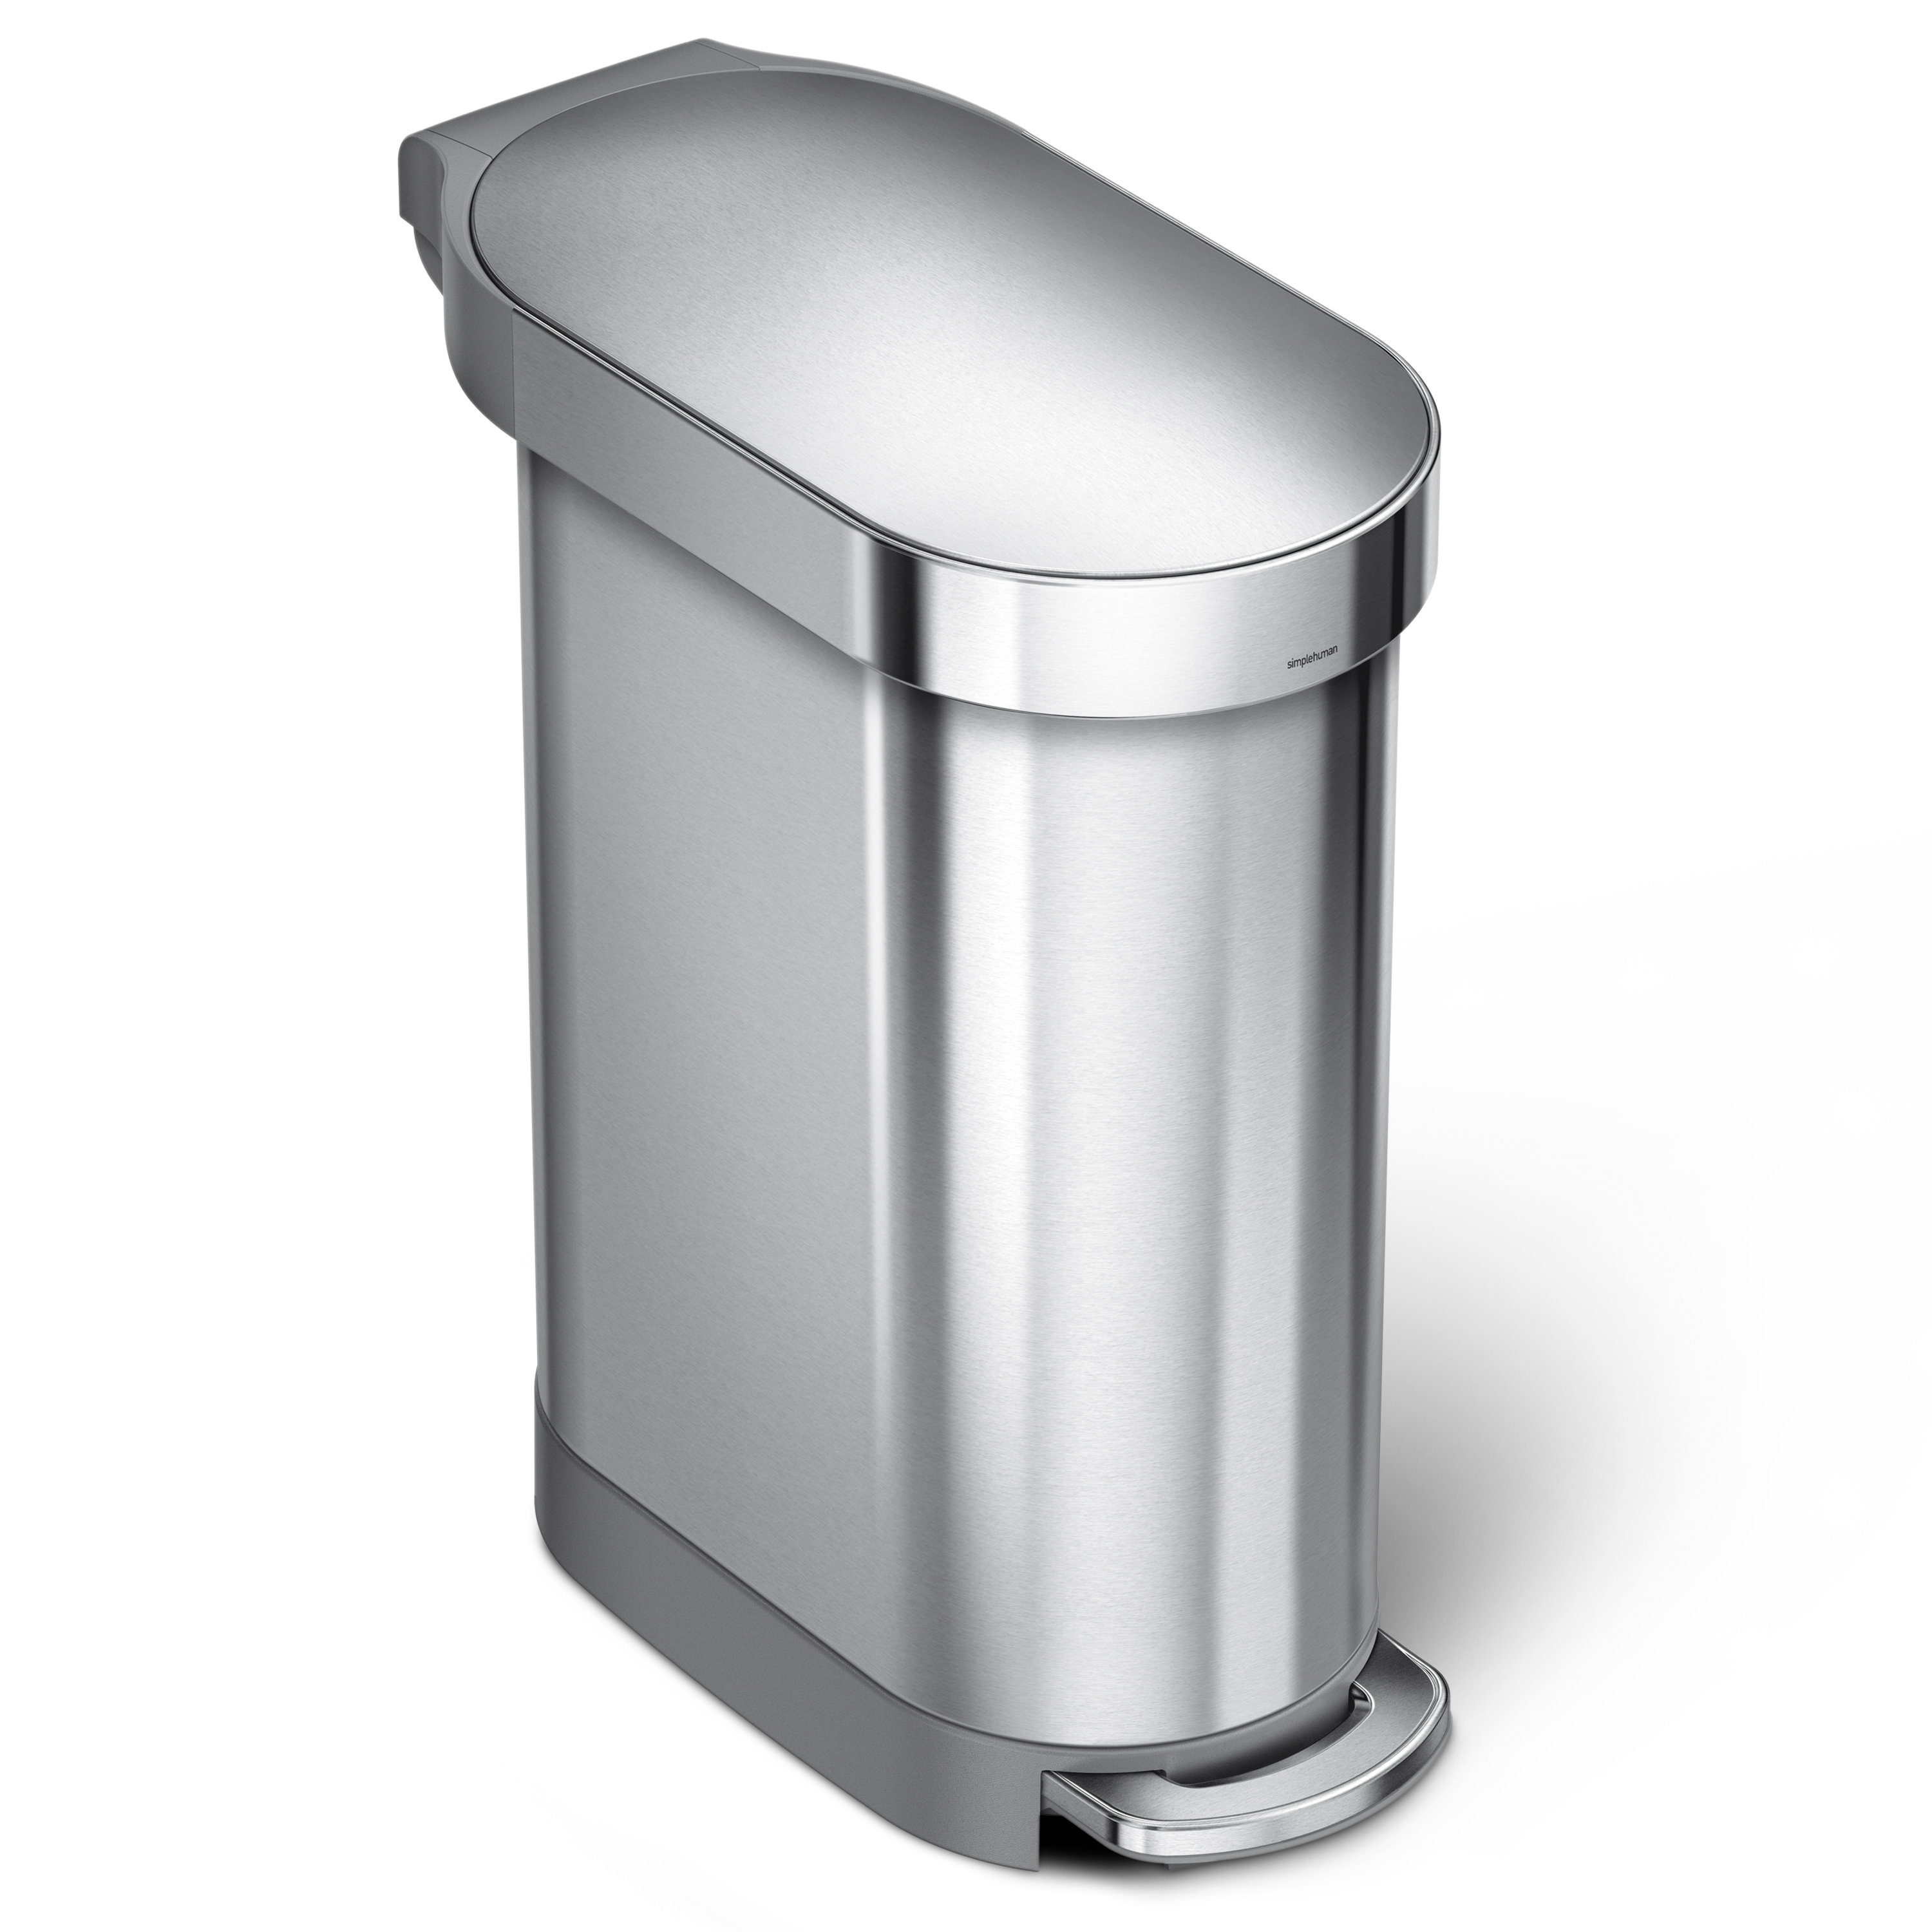 Expensive Kitchen Trash Cans - SimpleHuman Review